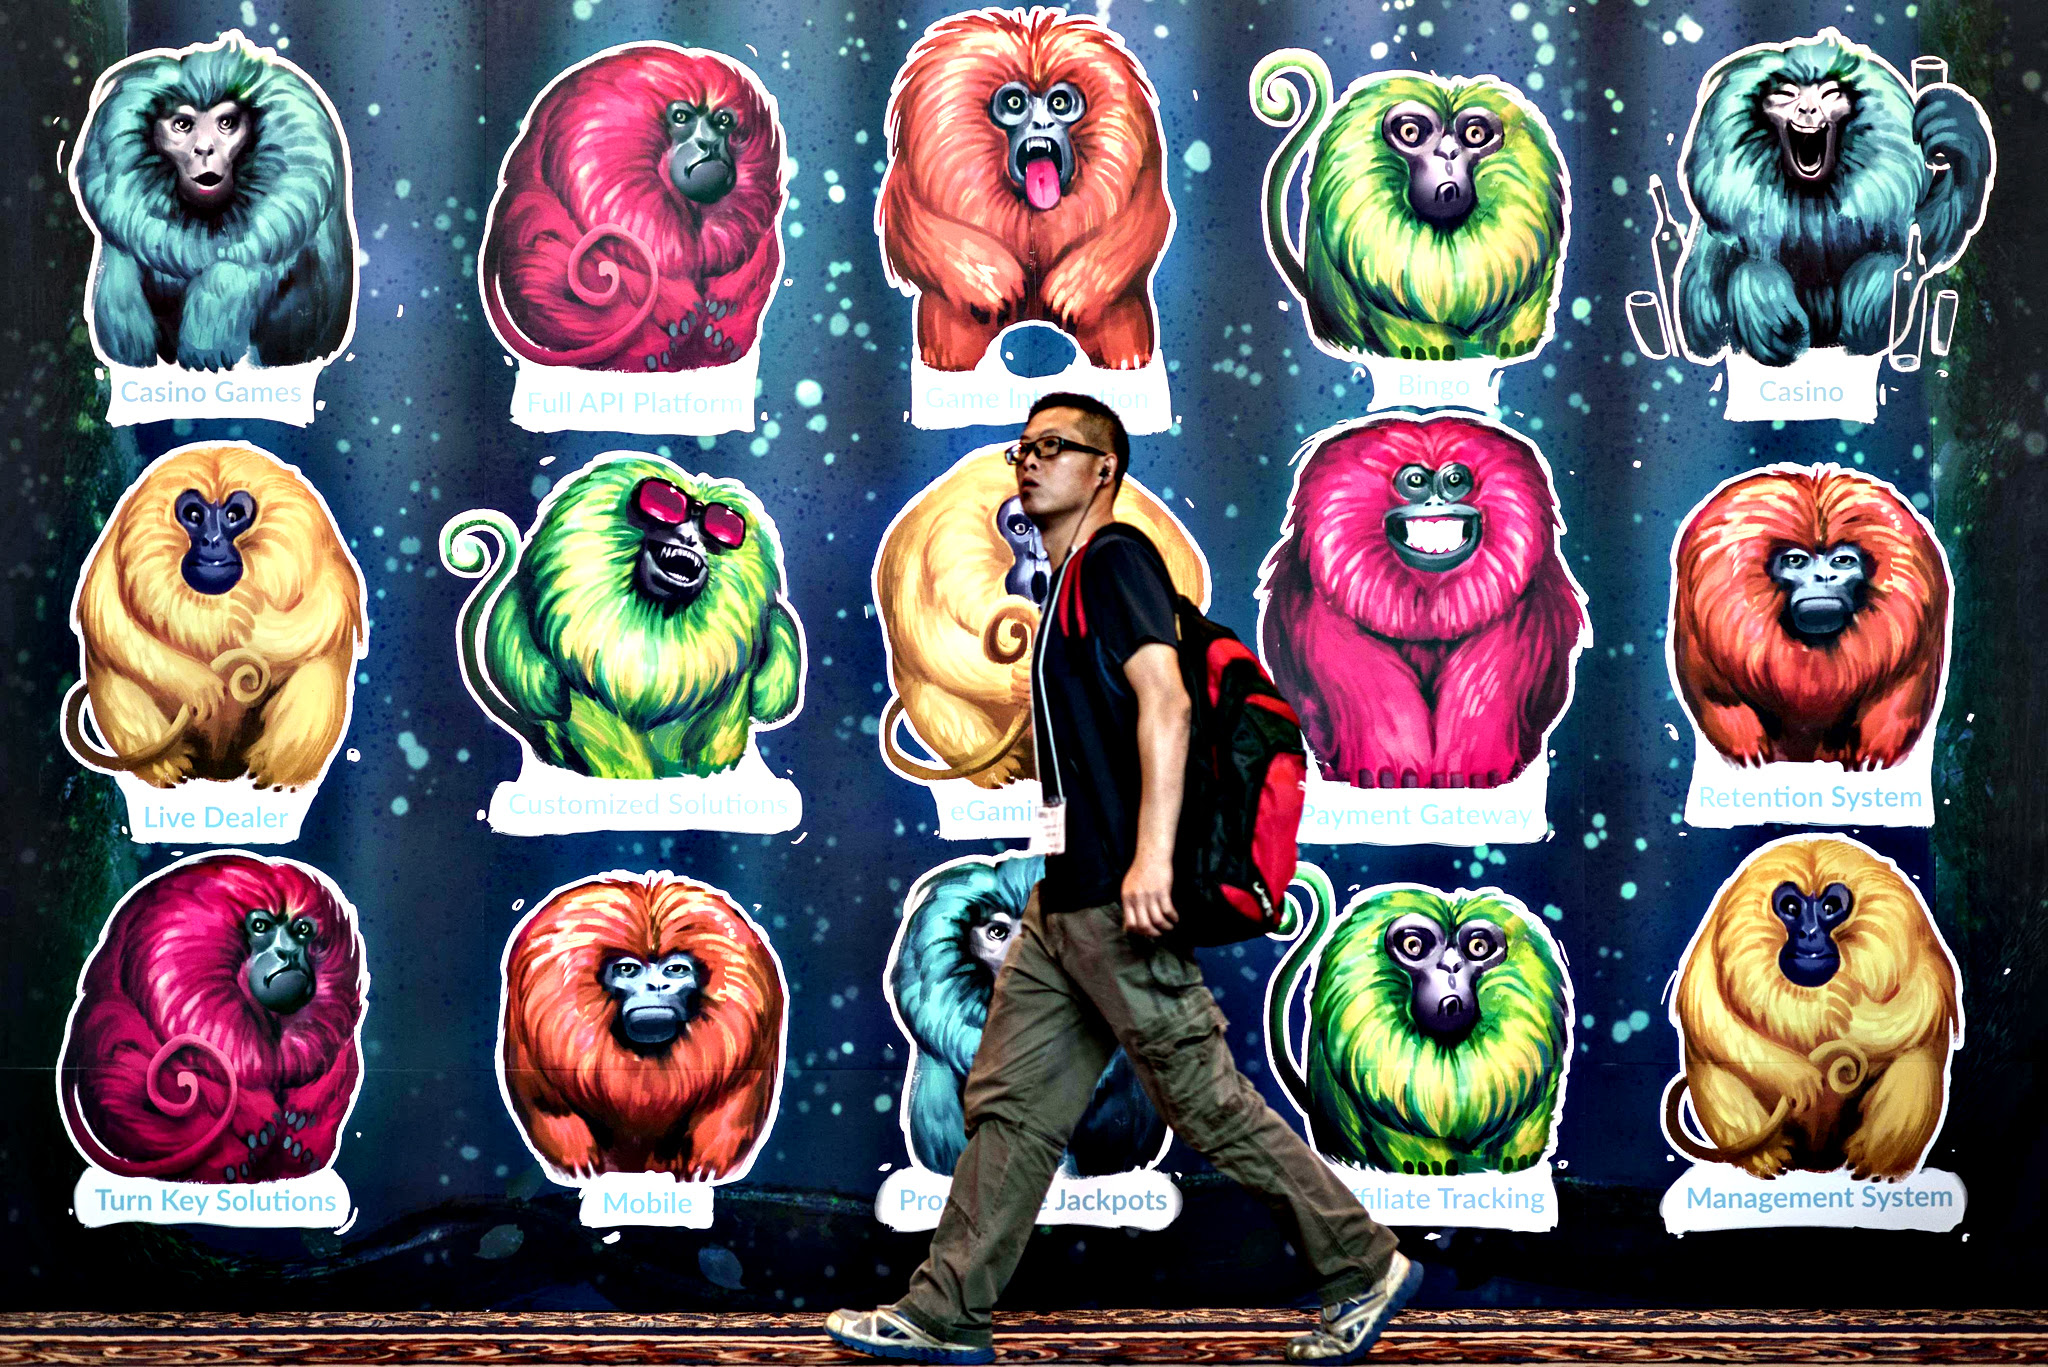 A man walks past a billboard at the Global Gaming Expo Asia in the world's biggest gambling hub of Macau on May 20, 2015. The three-day fair of gambling innovations, the largest gaming event in Asia, showcases the industry's latest products, services and technologies at the glitzy Venetian Macau hotel